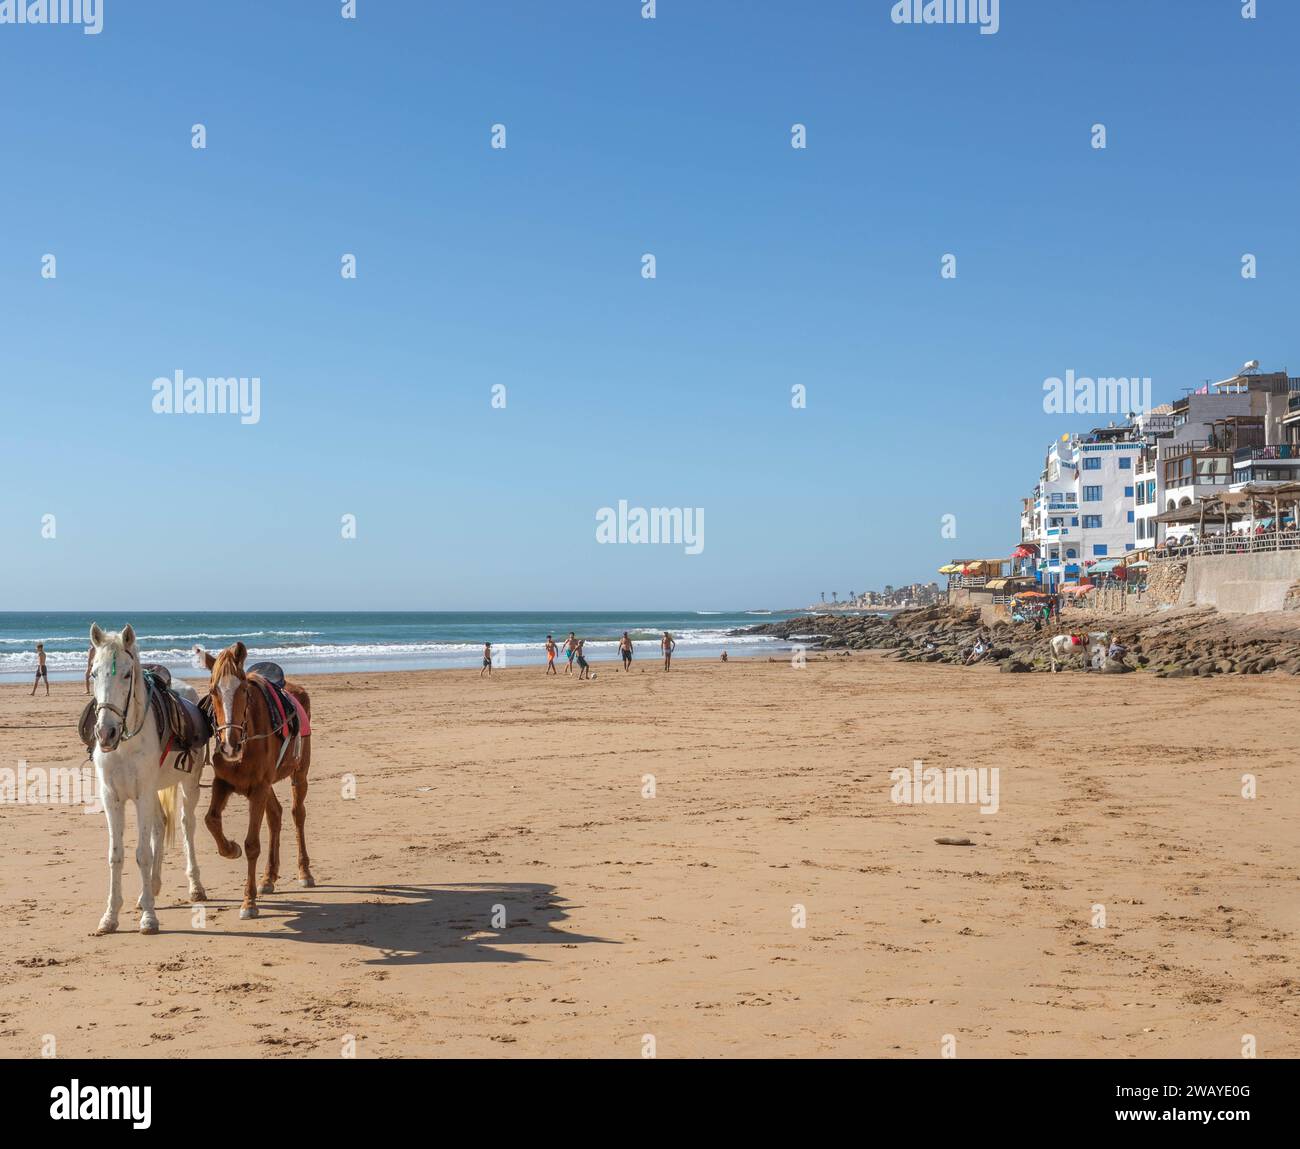 Horses on the sandy beach in the fishing village of Taghazout, Morocco, North Africa. Stock Photo